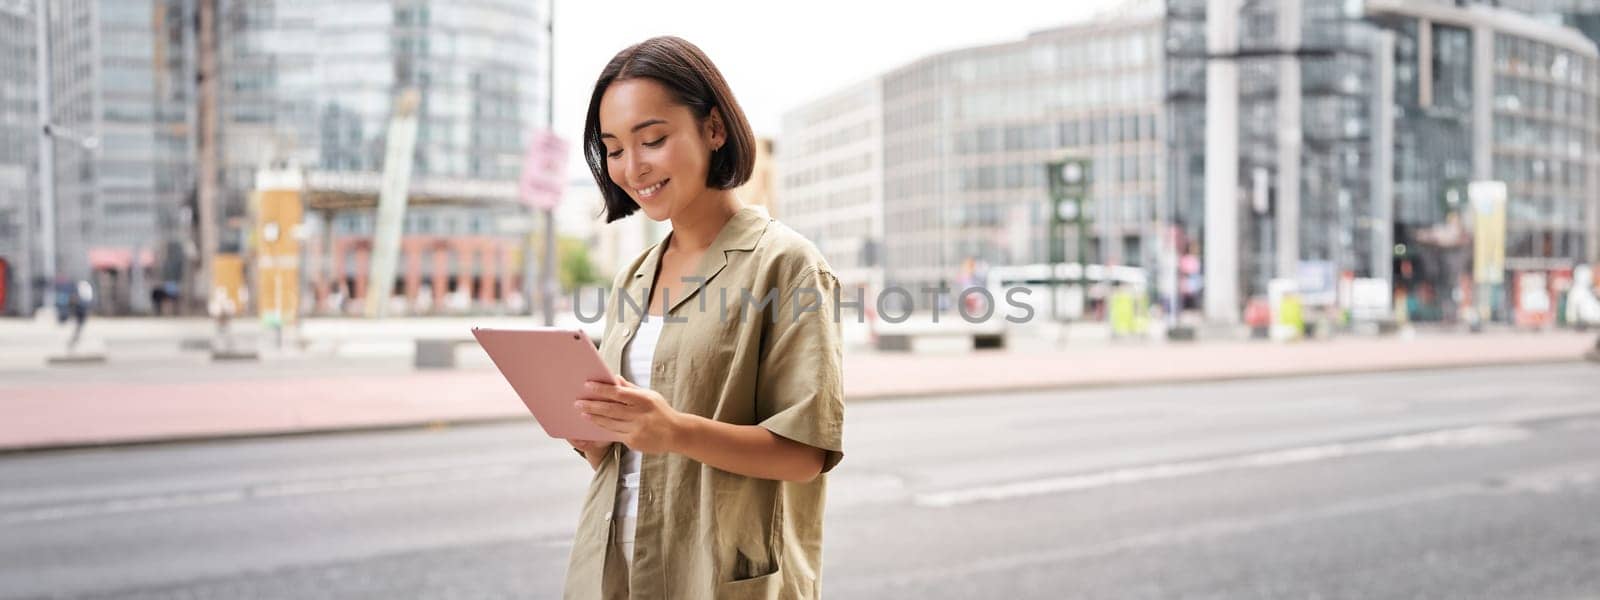 Portrait of young stylish woman walking with tablet, going somewhere in city.